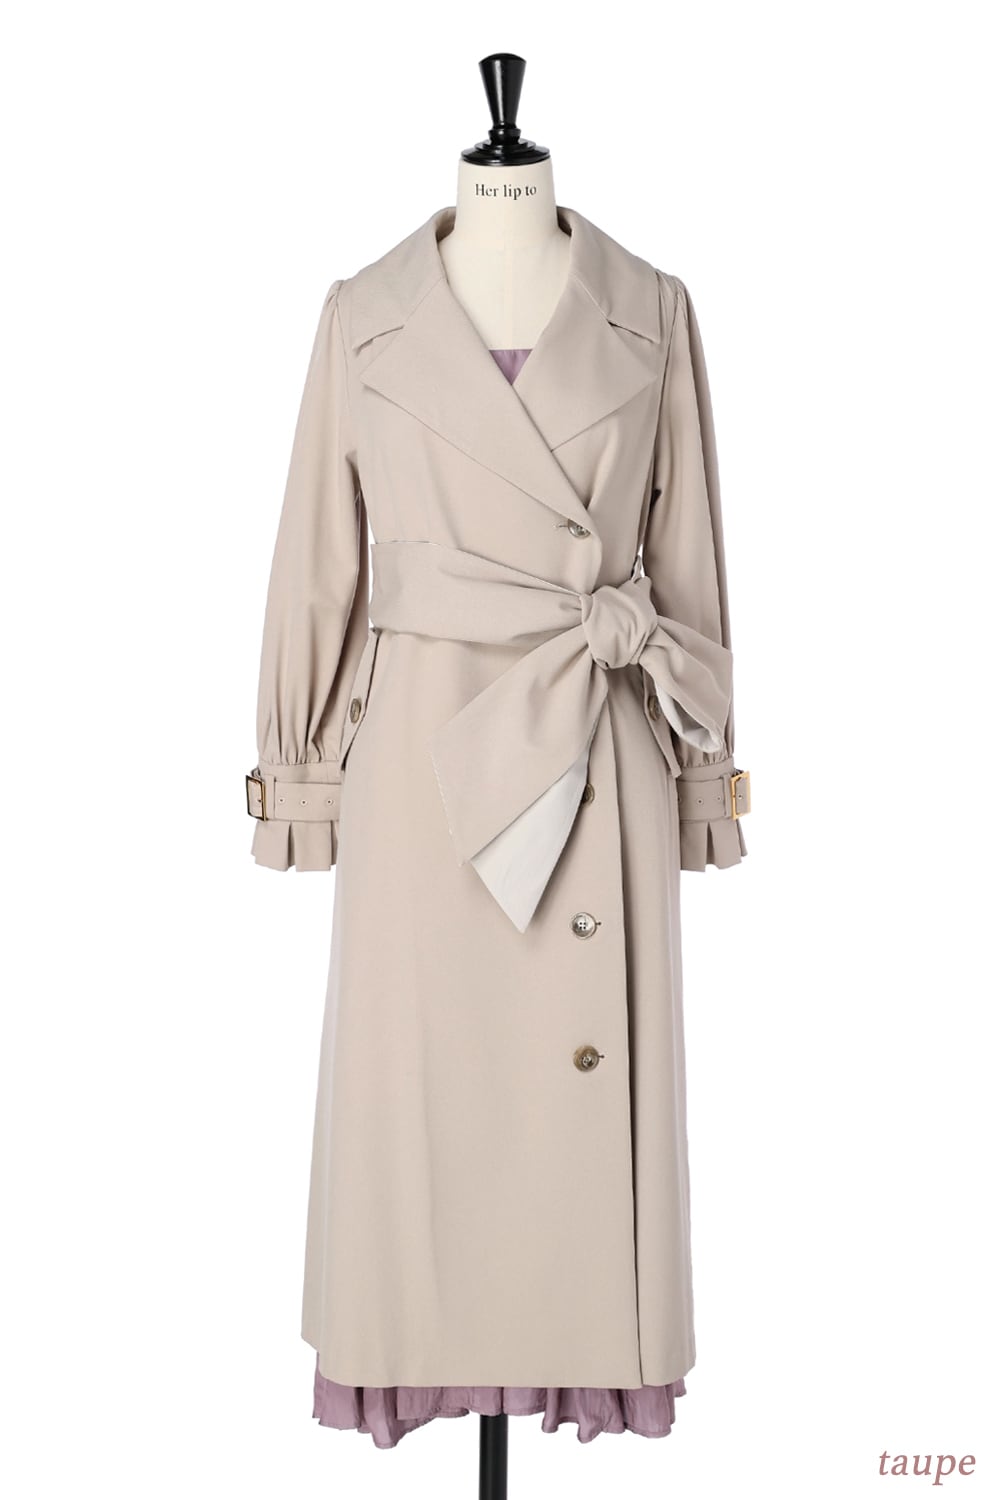 Her lip to Belted Dress Trench Coat M eva.gov.co